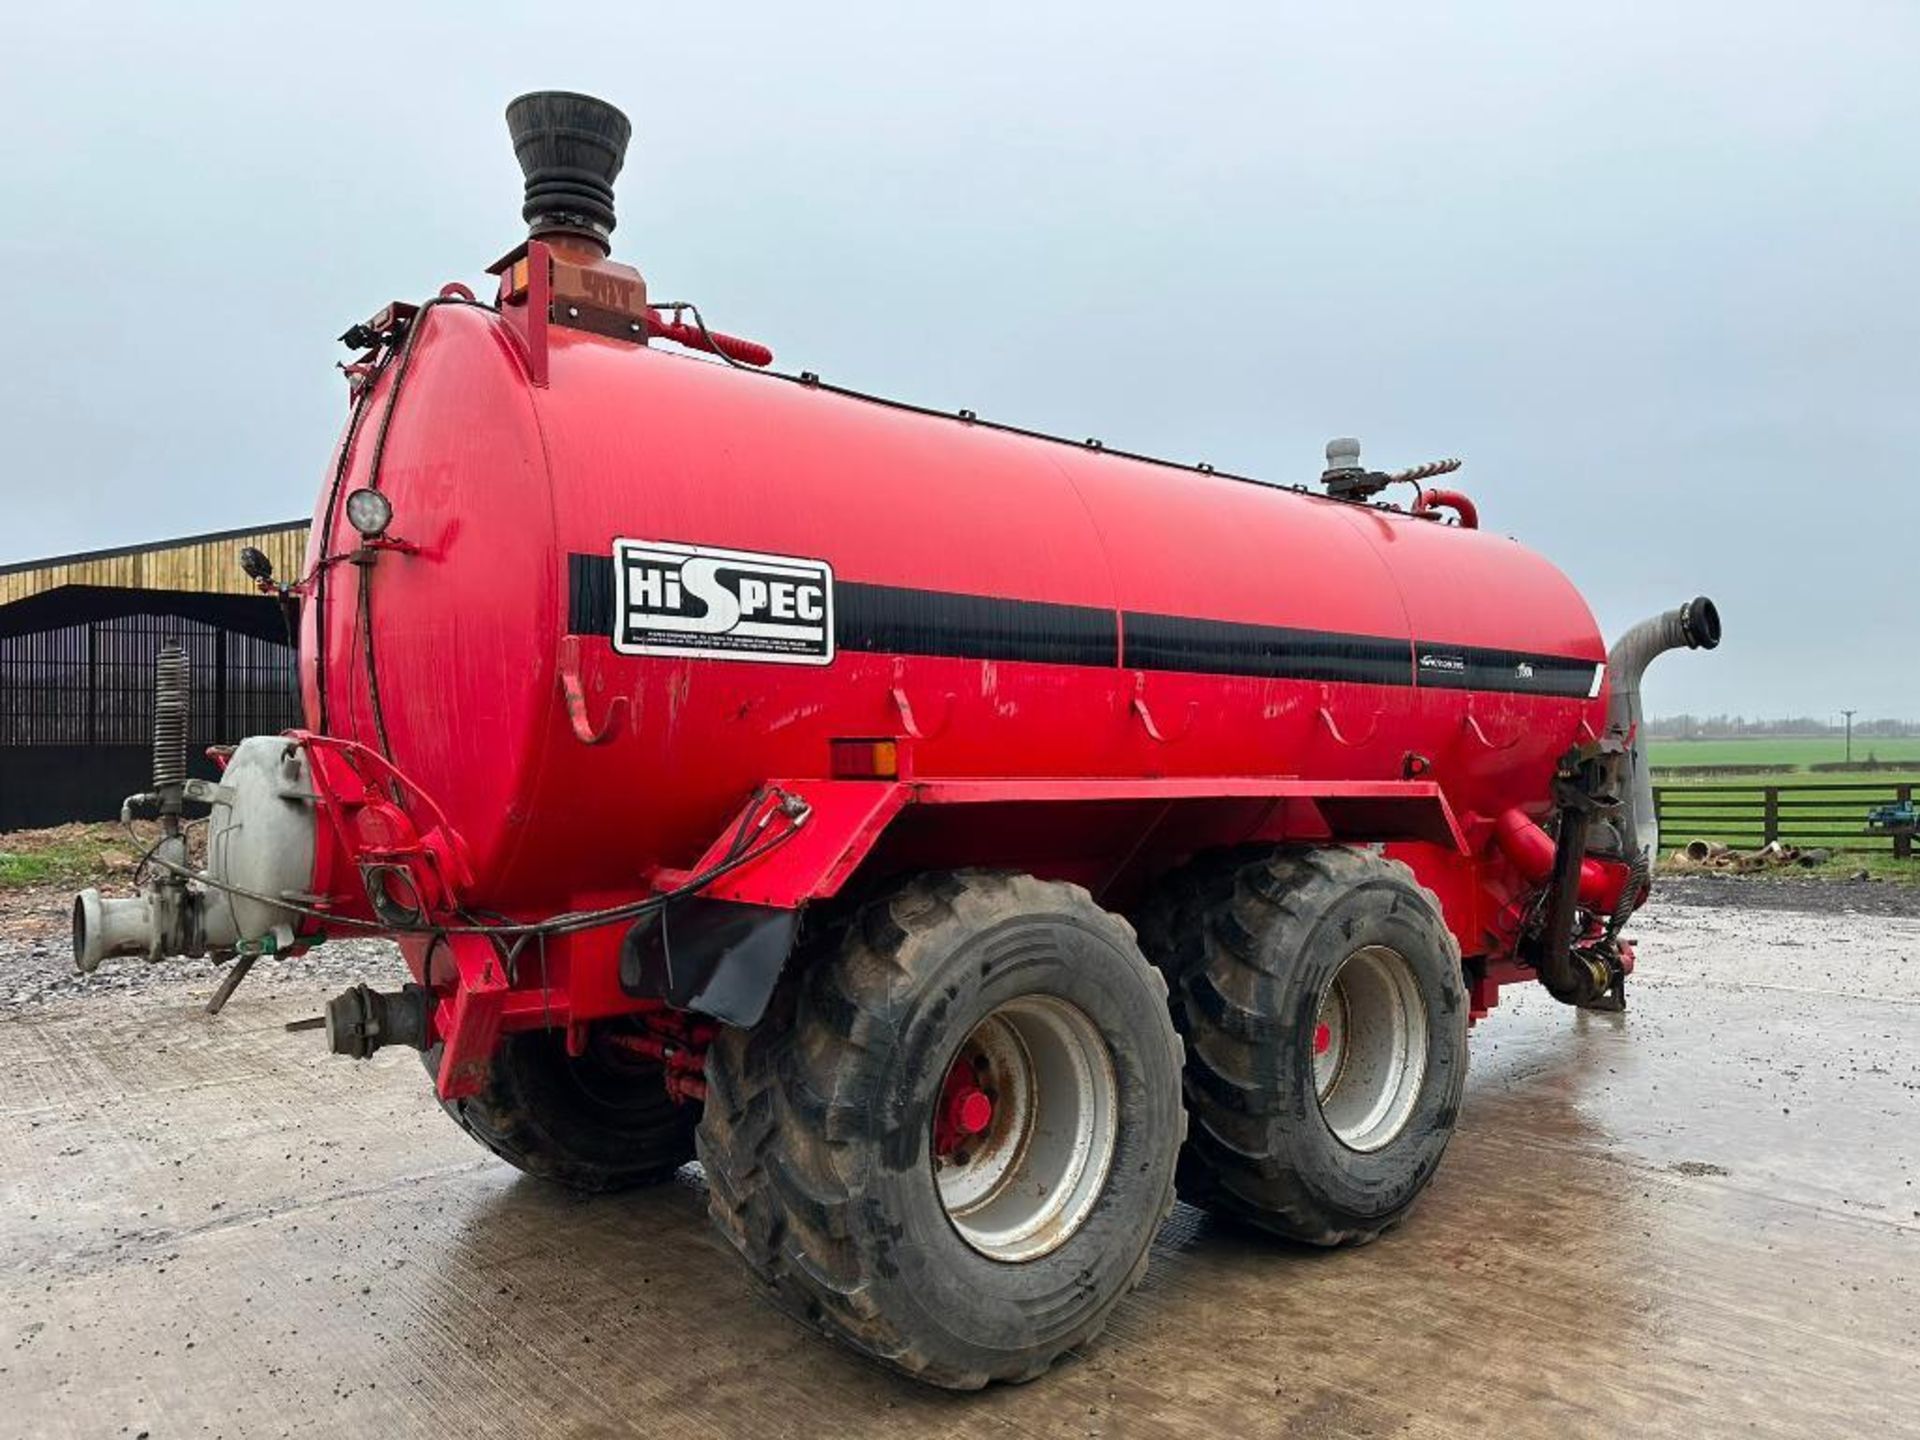 2015 HiSpec TDS 3500 twin axle 3,500 gallon slurry tanker, after market suction funnels, 8" auto fil - Image 8 of 10